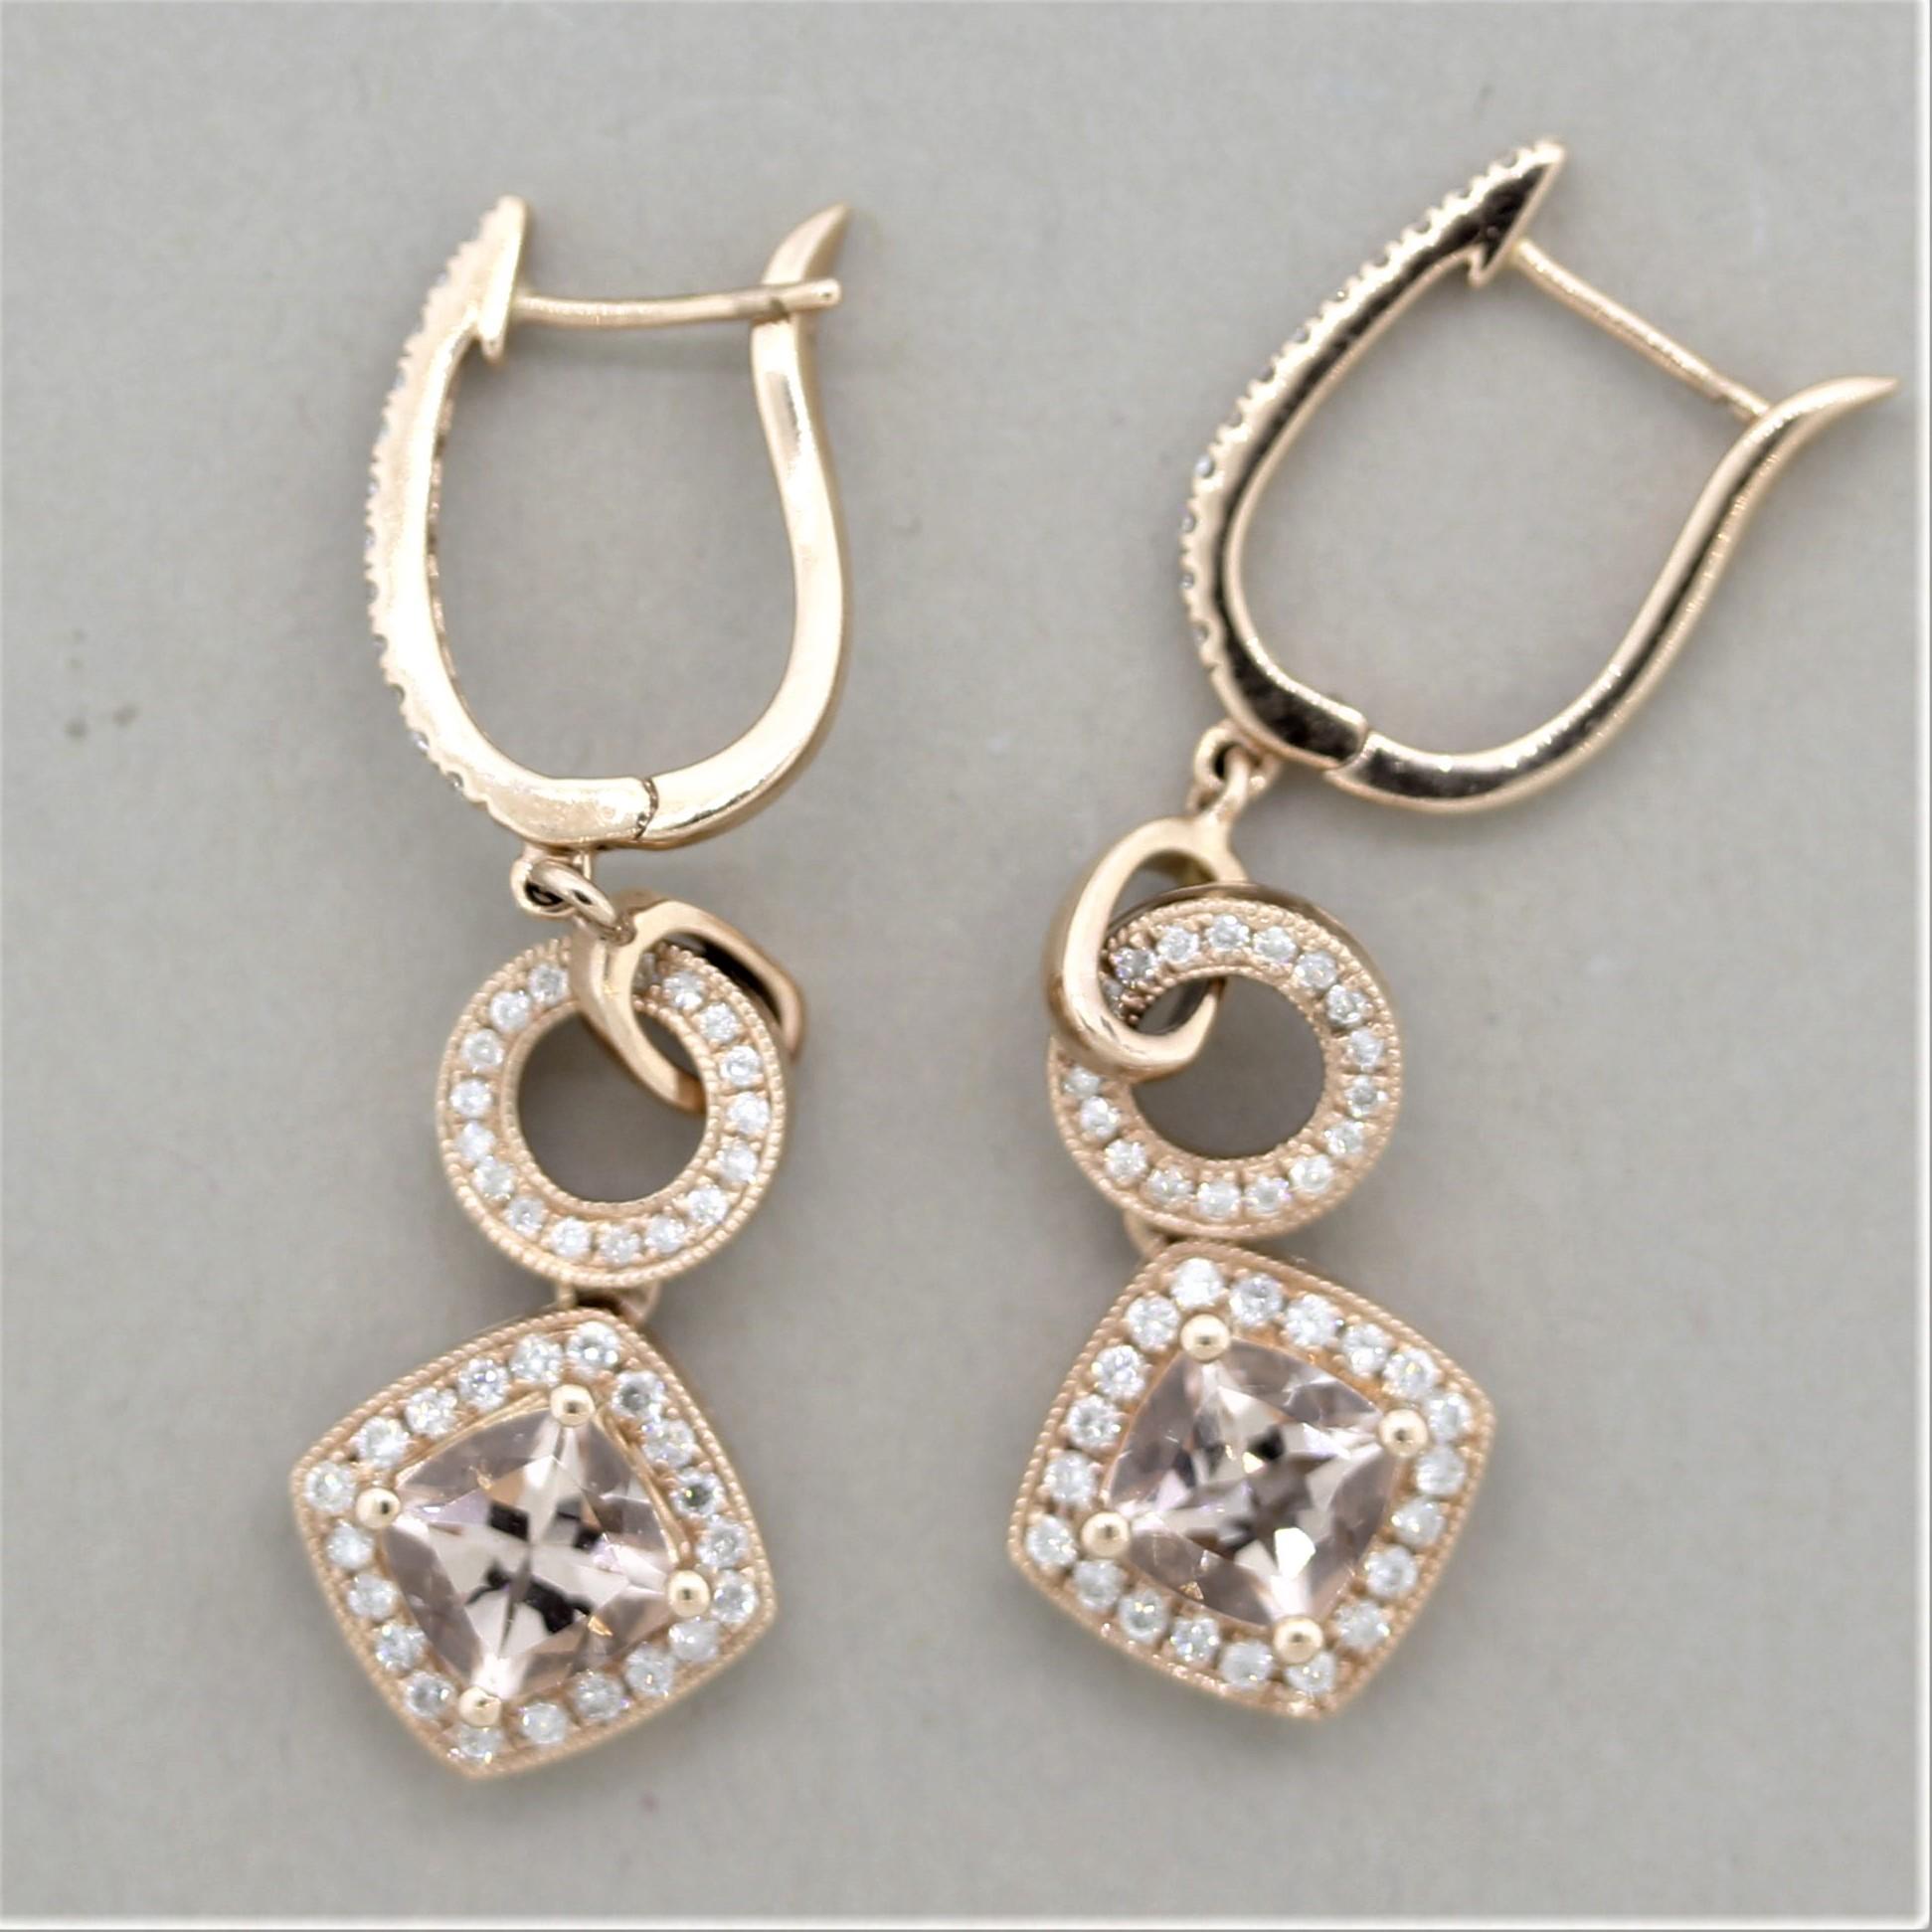 A pair of long and stylish drop morganite earrings! The cushion-shaped morganites weigh a total of 1.70 carats and have a lovely pinkish-peach color. They are accented by 0.74 carats of round brilliant-cut diamonds set around the morganites as well